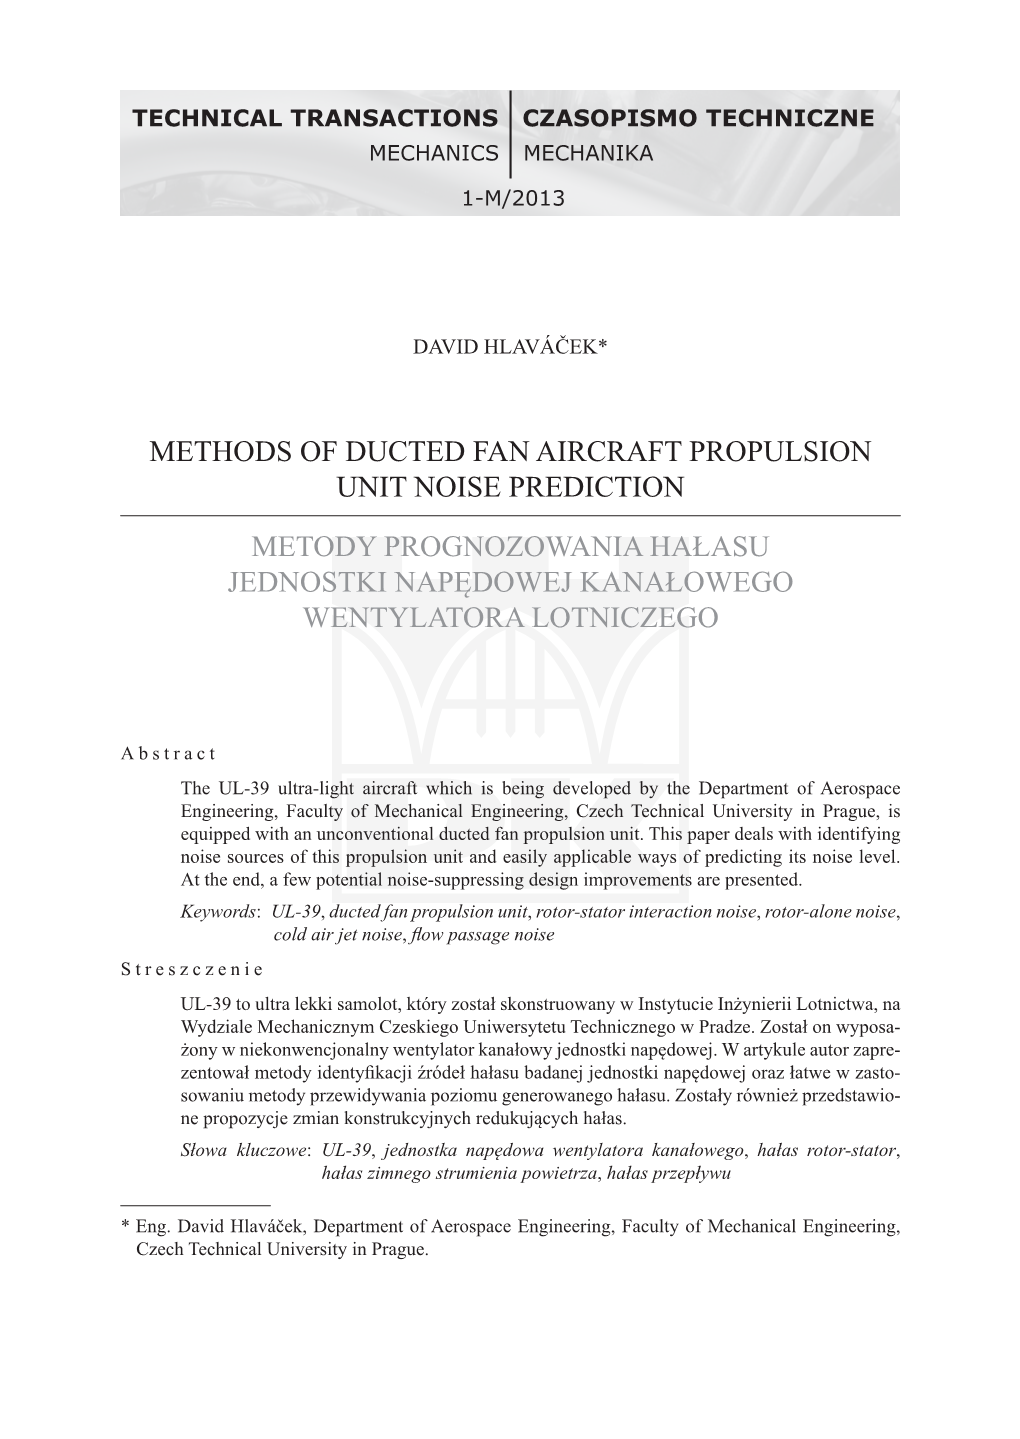 Methods of Ducted Fan Aircraft Propulsion Unit Noise Prediction